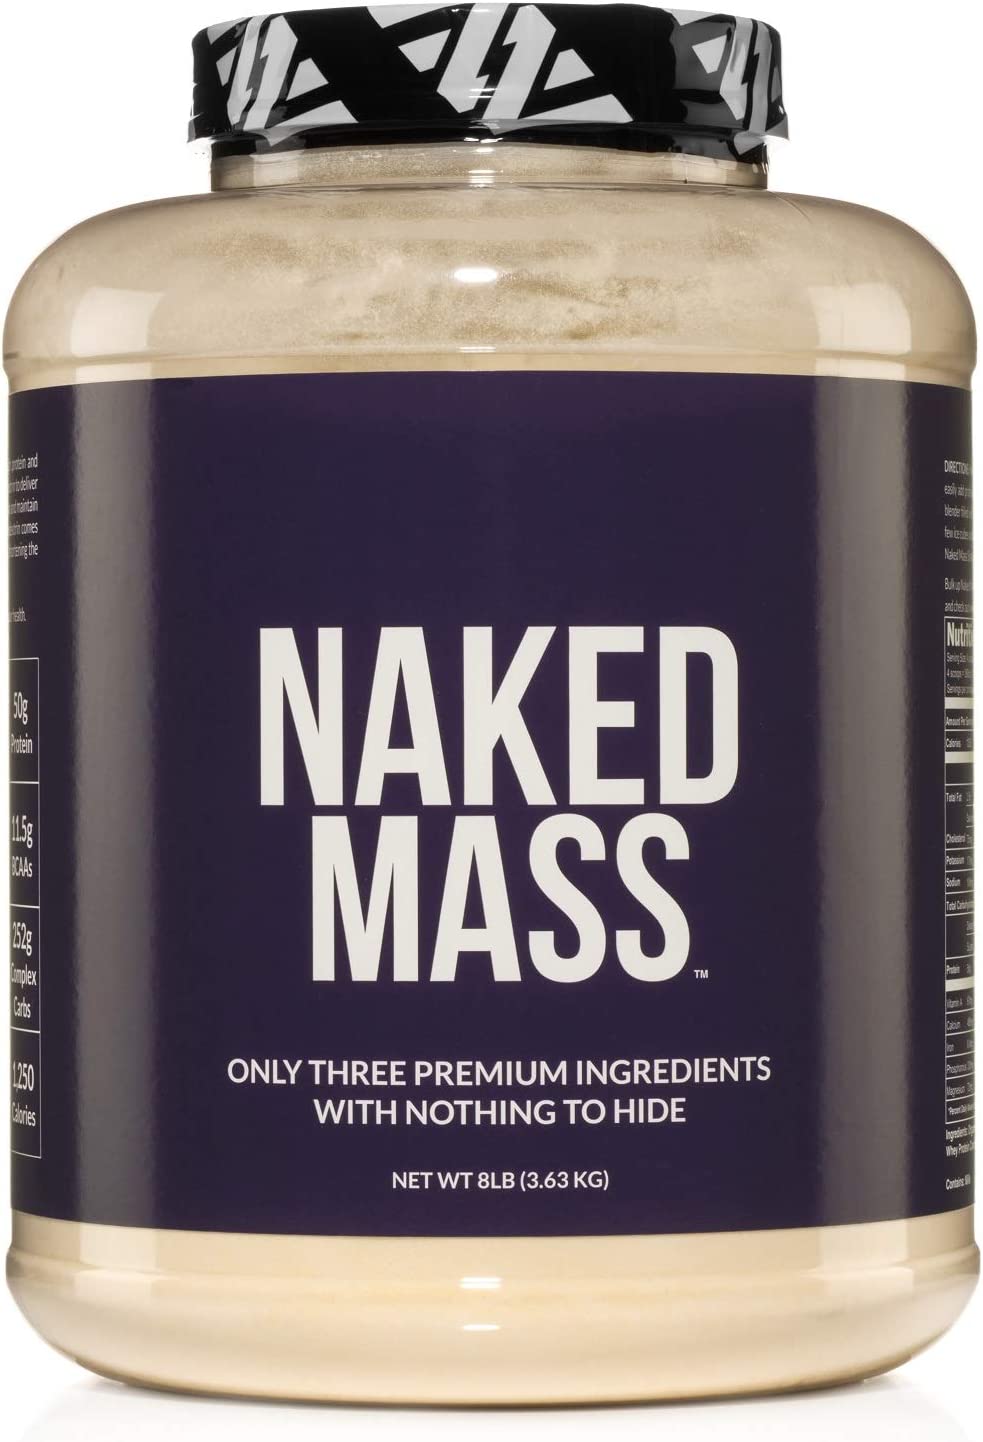 Naked Mass weight gainer